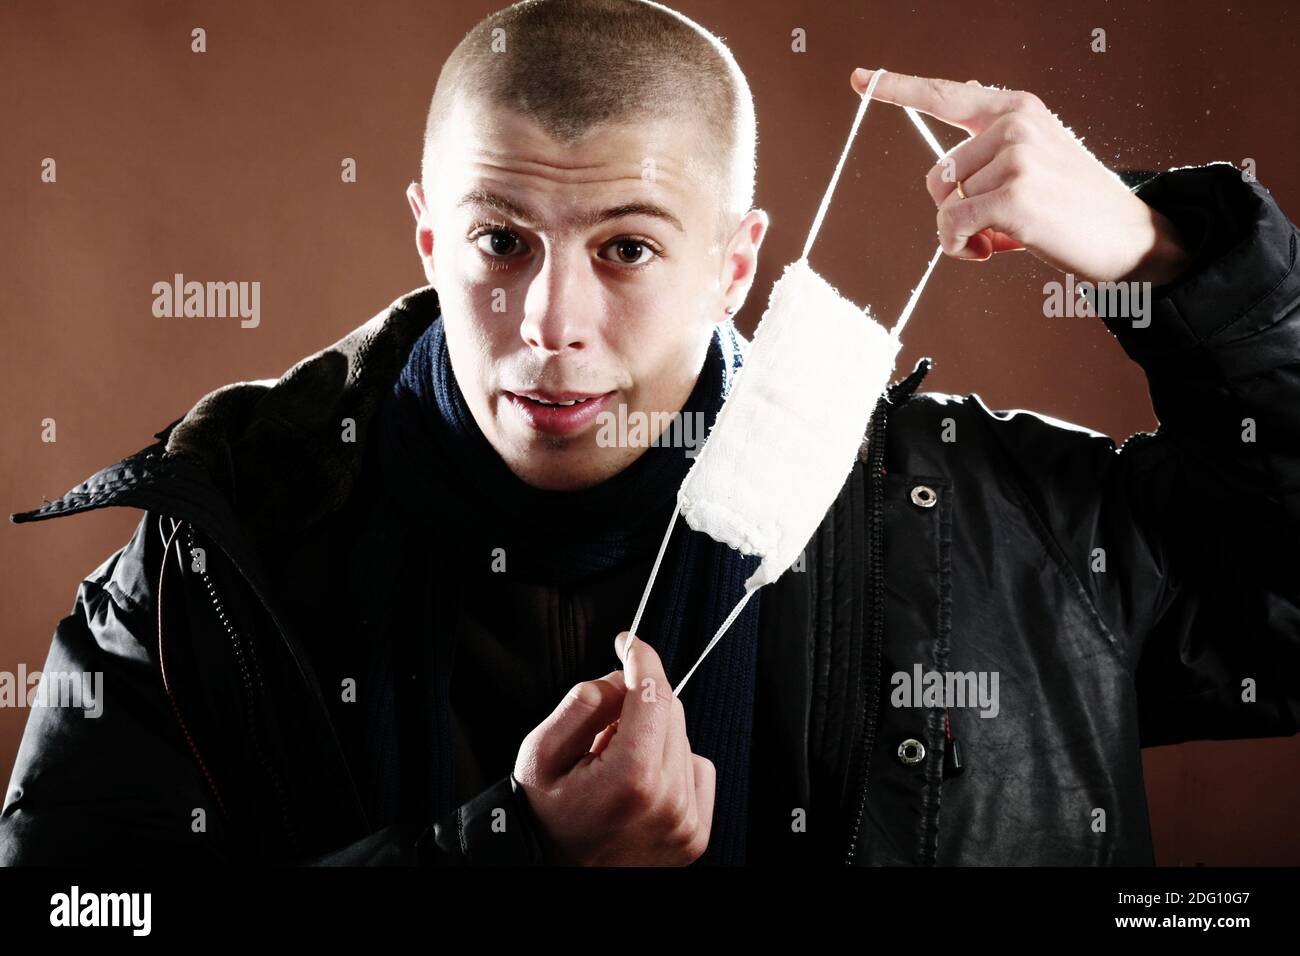 Man with protective mask Stock Photo